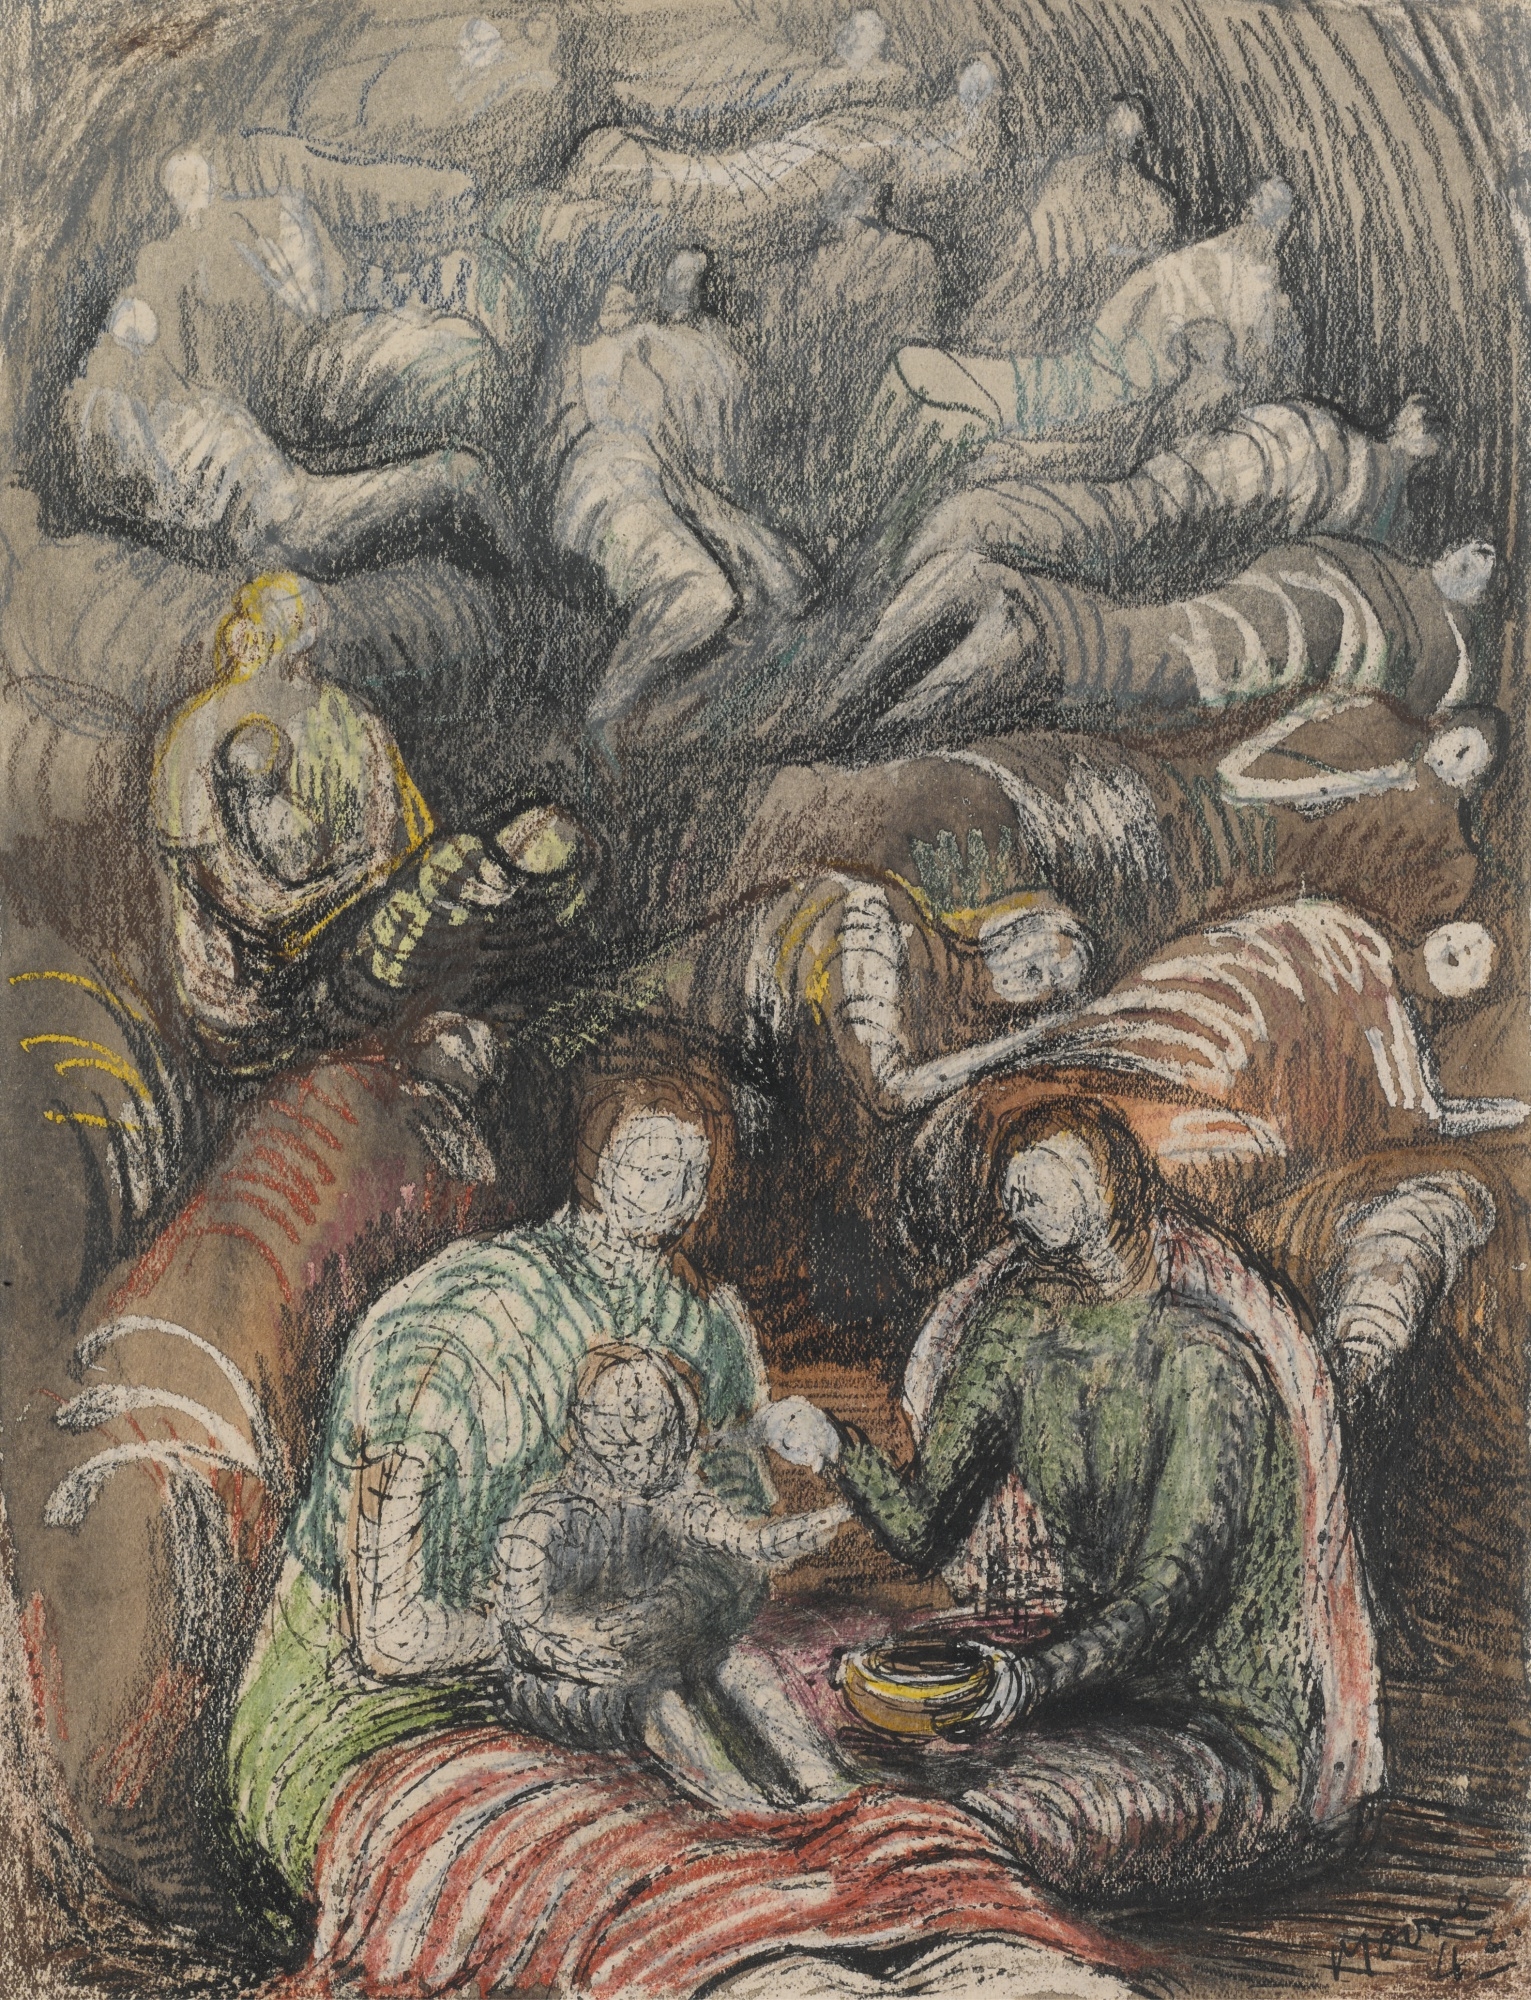 Artwork by Henry Moore, SHELTER DRAWING, Made of pencil, watercolour, wax crayon, pen and ink on paper